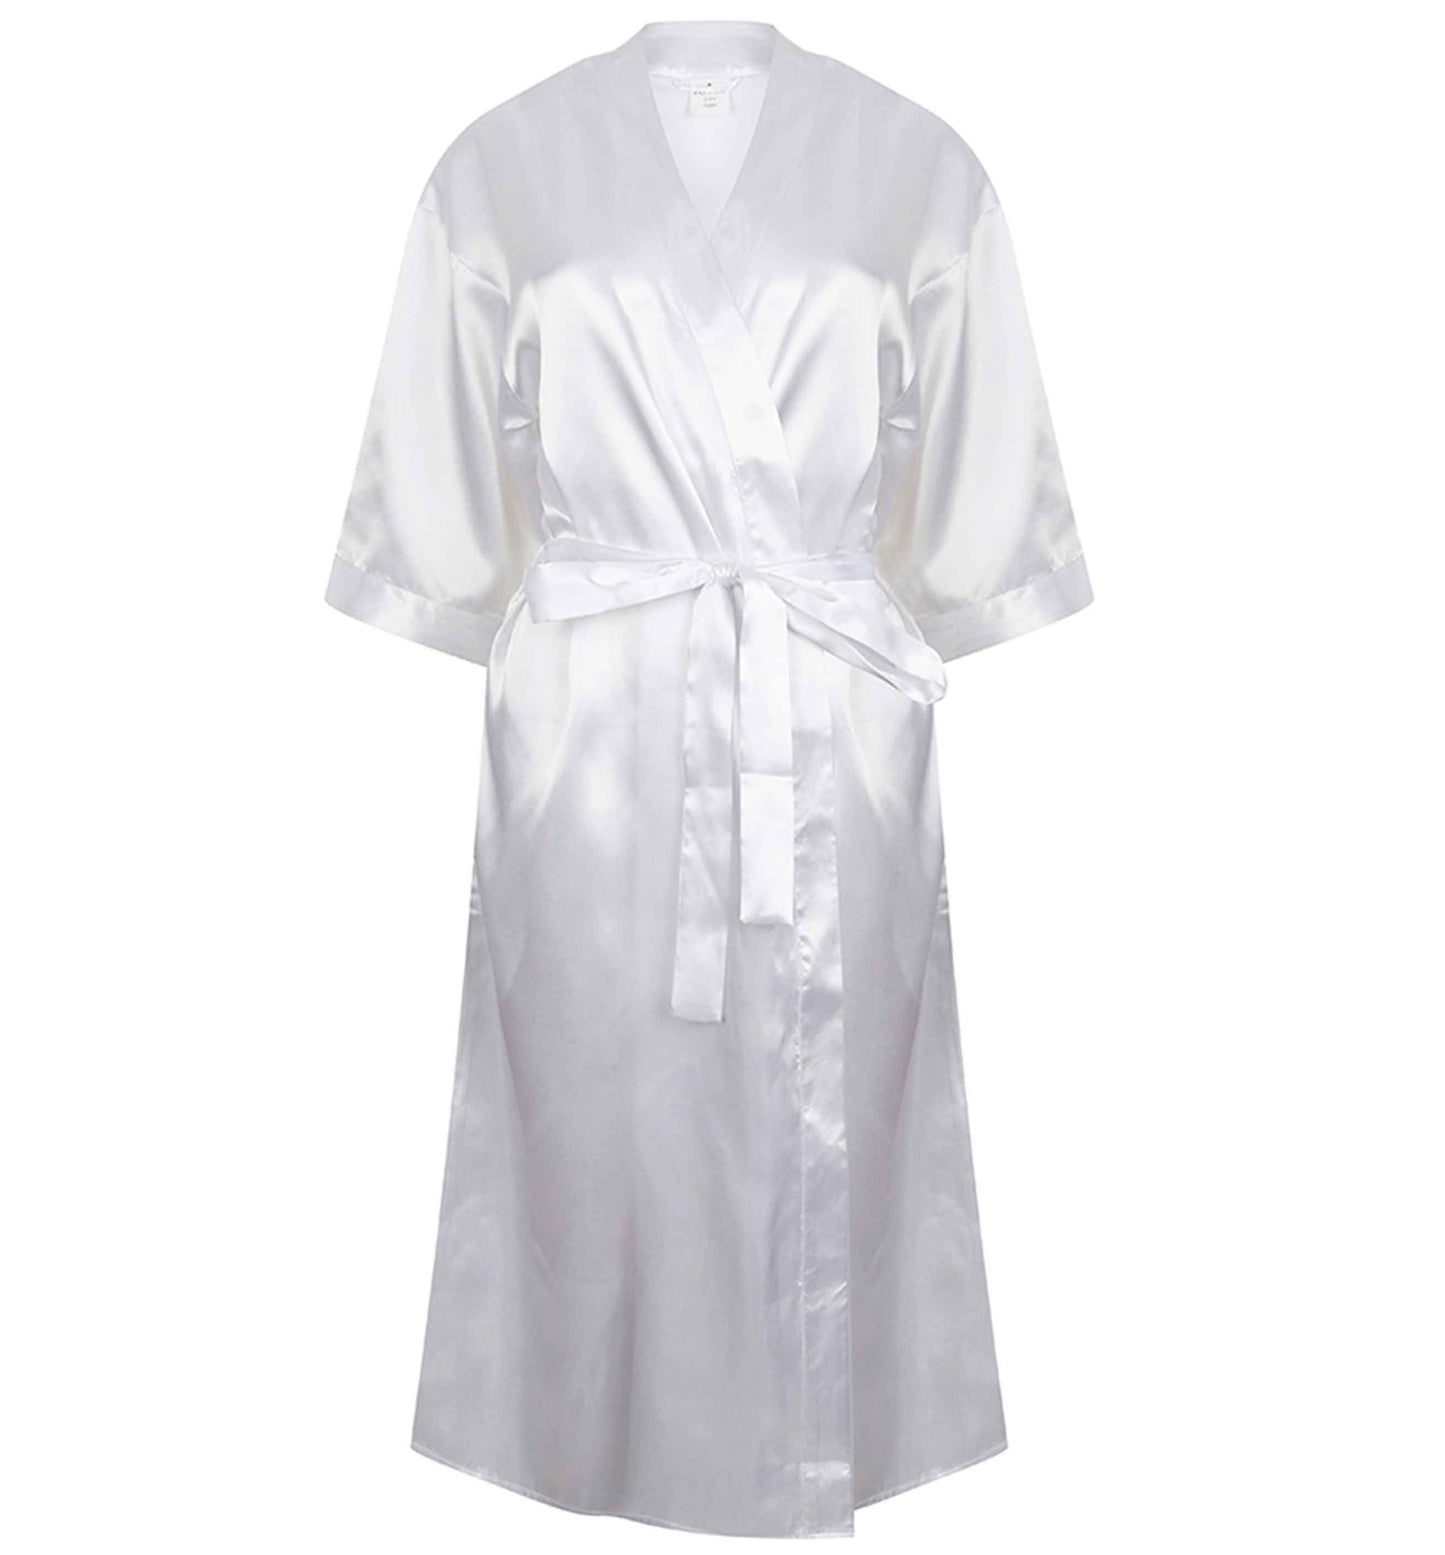 2020 The year we had all of the tricks and none of the treats | 8-18 | Kimono style satin robe | Ladies dressing gown